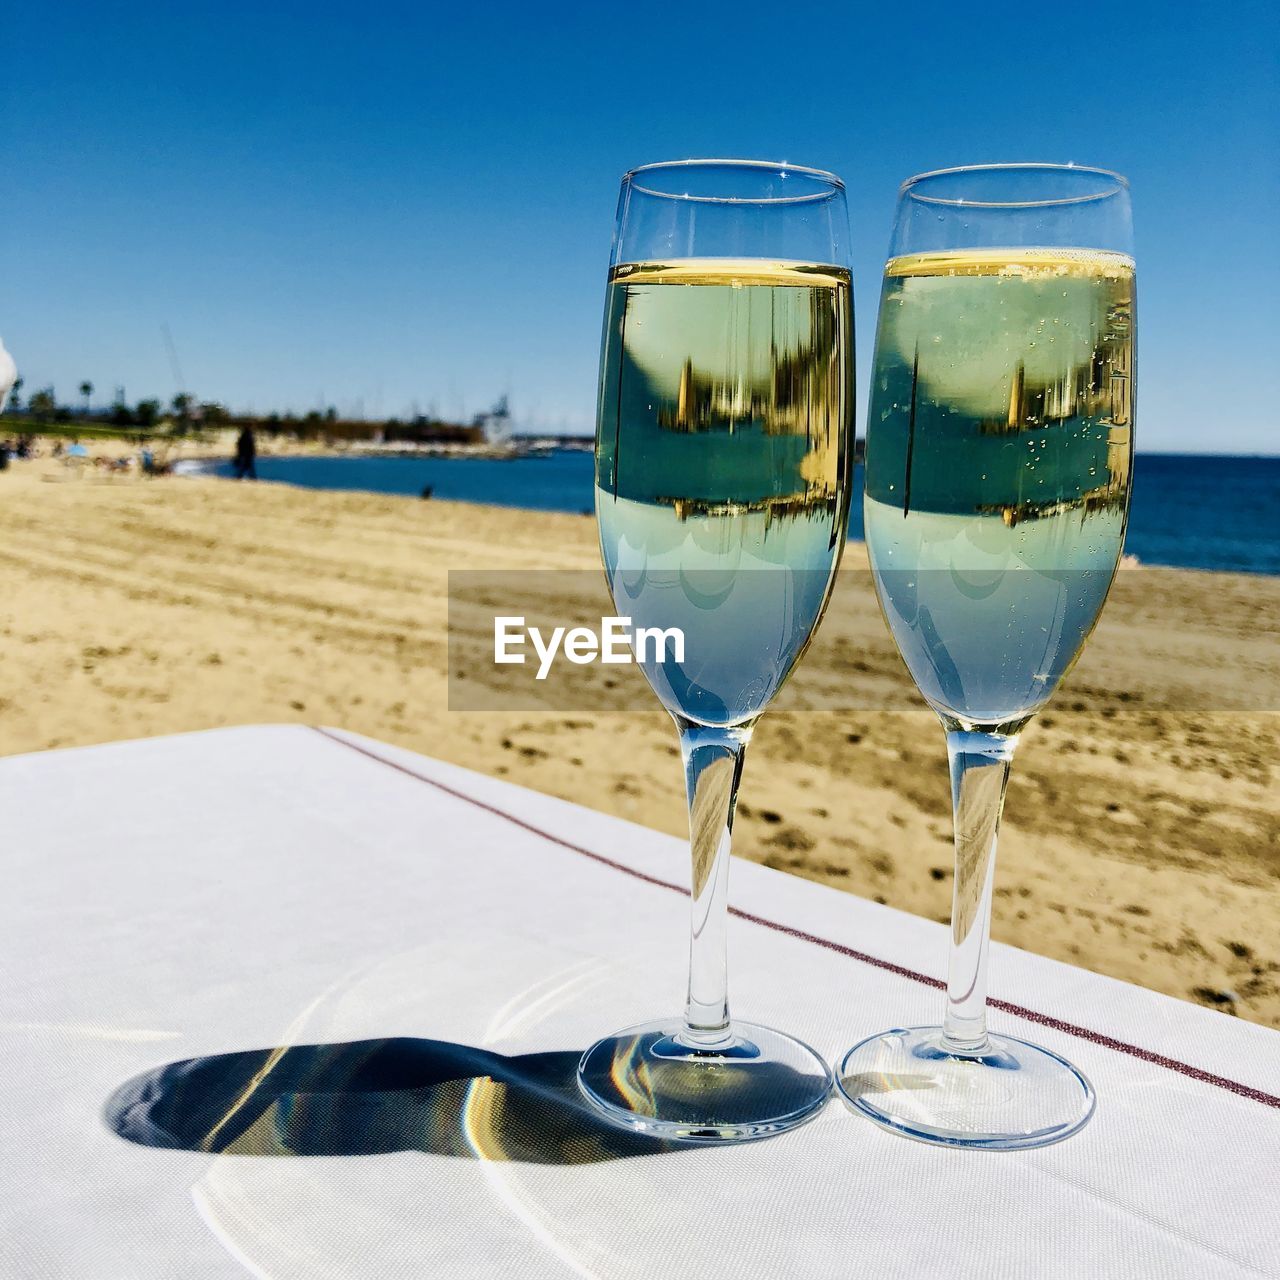 Wine glasses on table at beach against sky